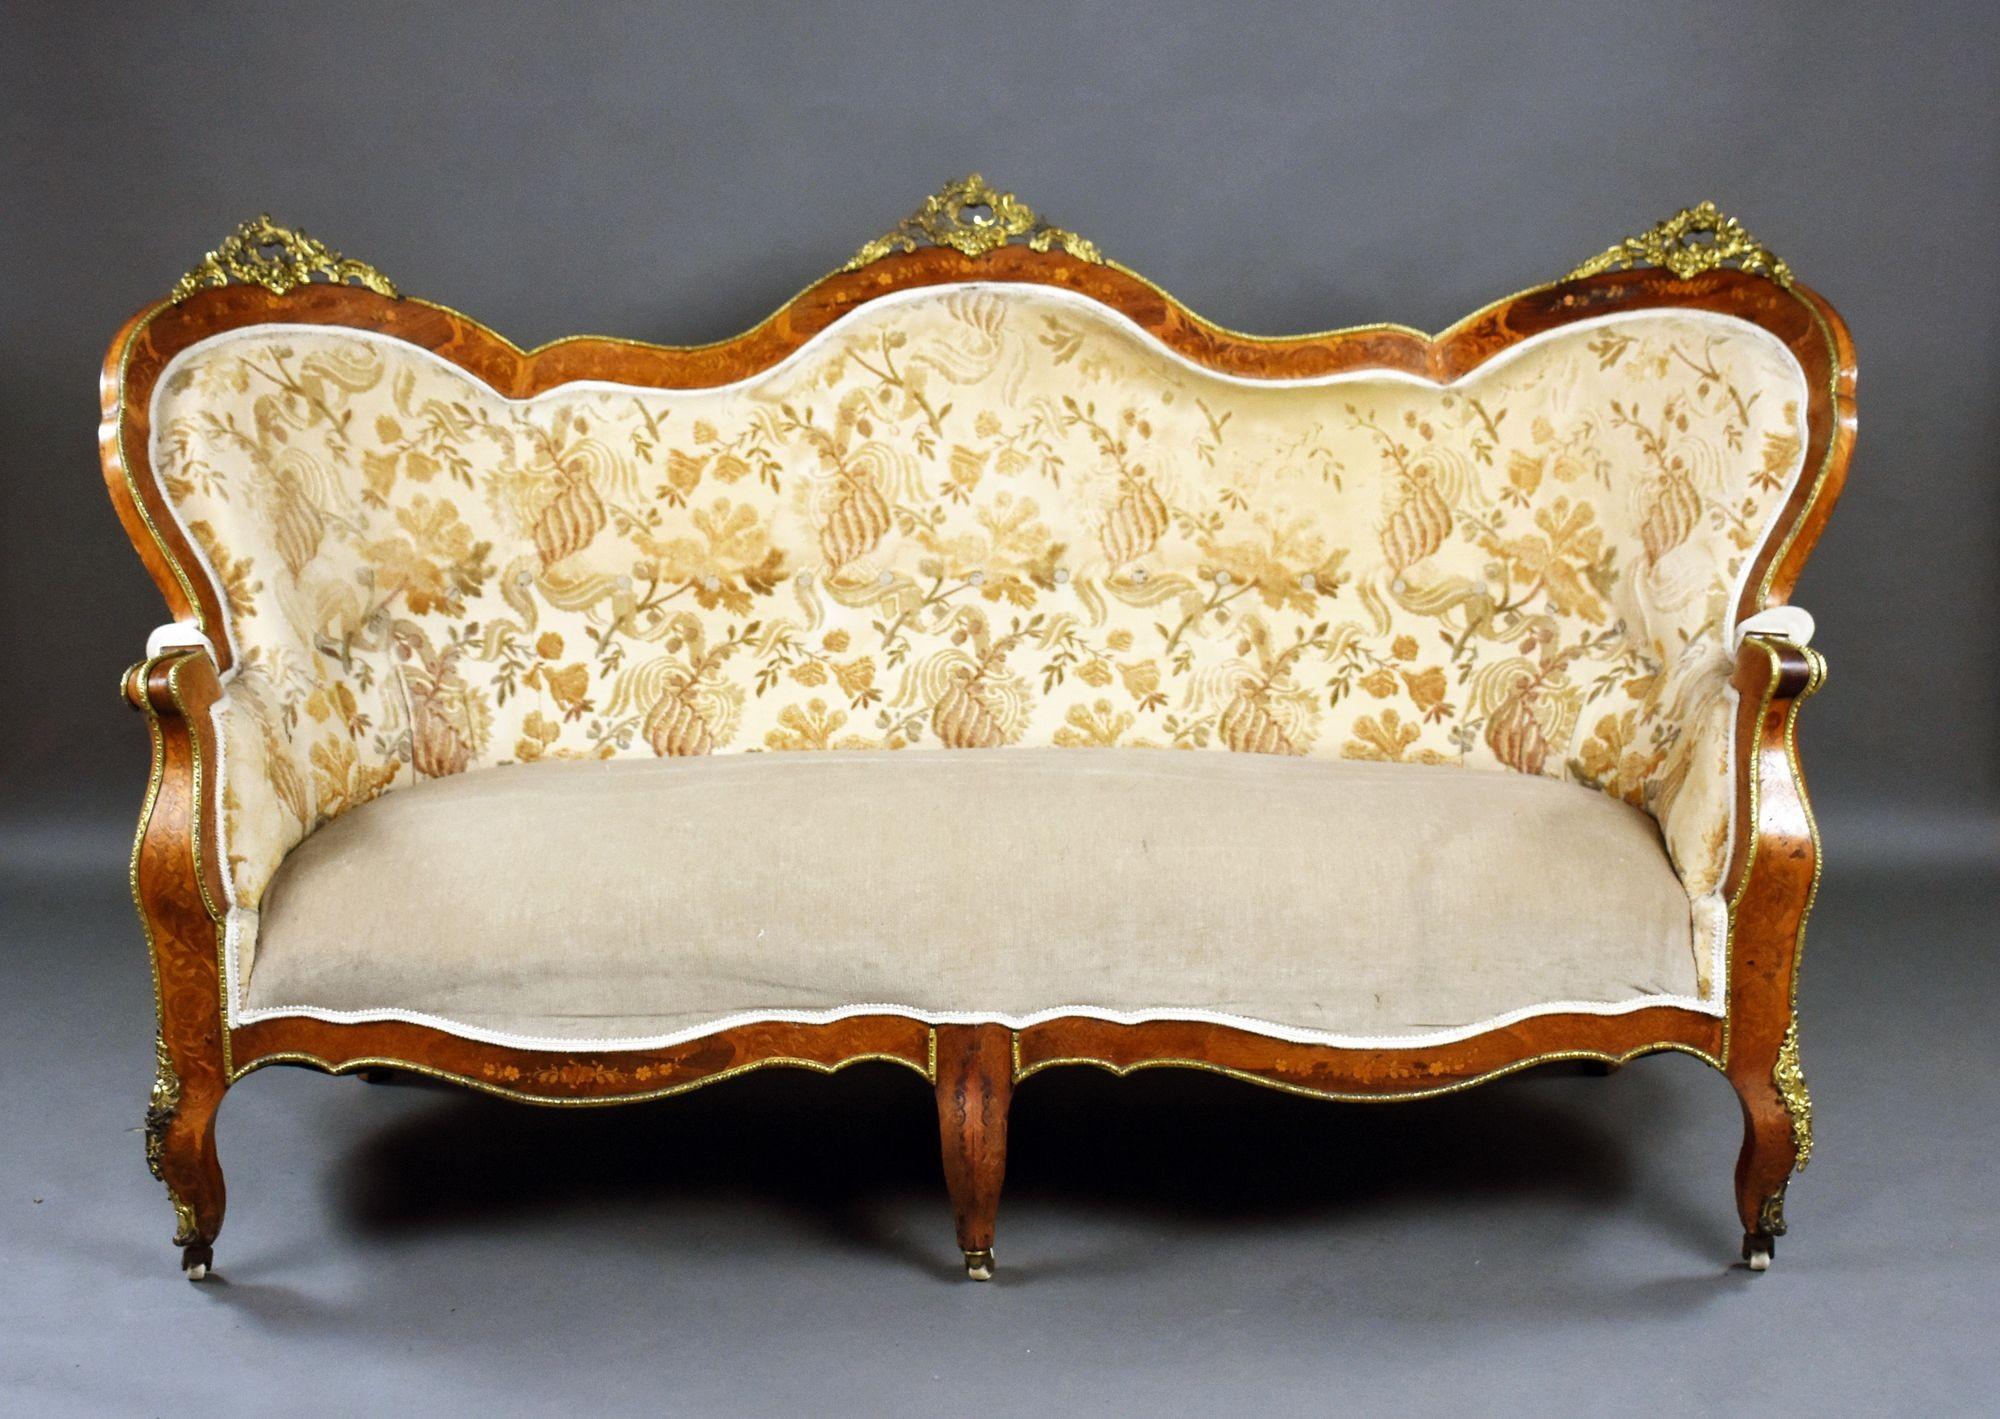 For sale is a good quality antique French marquetry sofa, the frame decorated with brass mounts and ornate marquetry inlay, standing on elegant legs terminating on original castors, the sofa remains in good condition, showing minor signs of wear